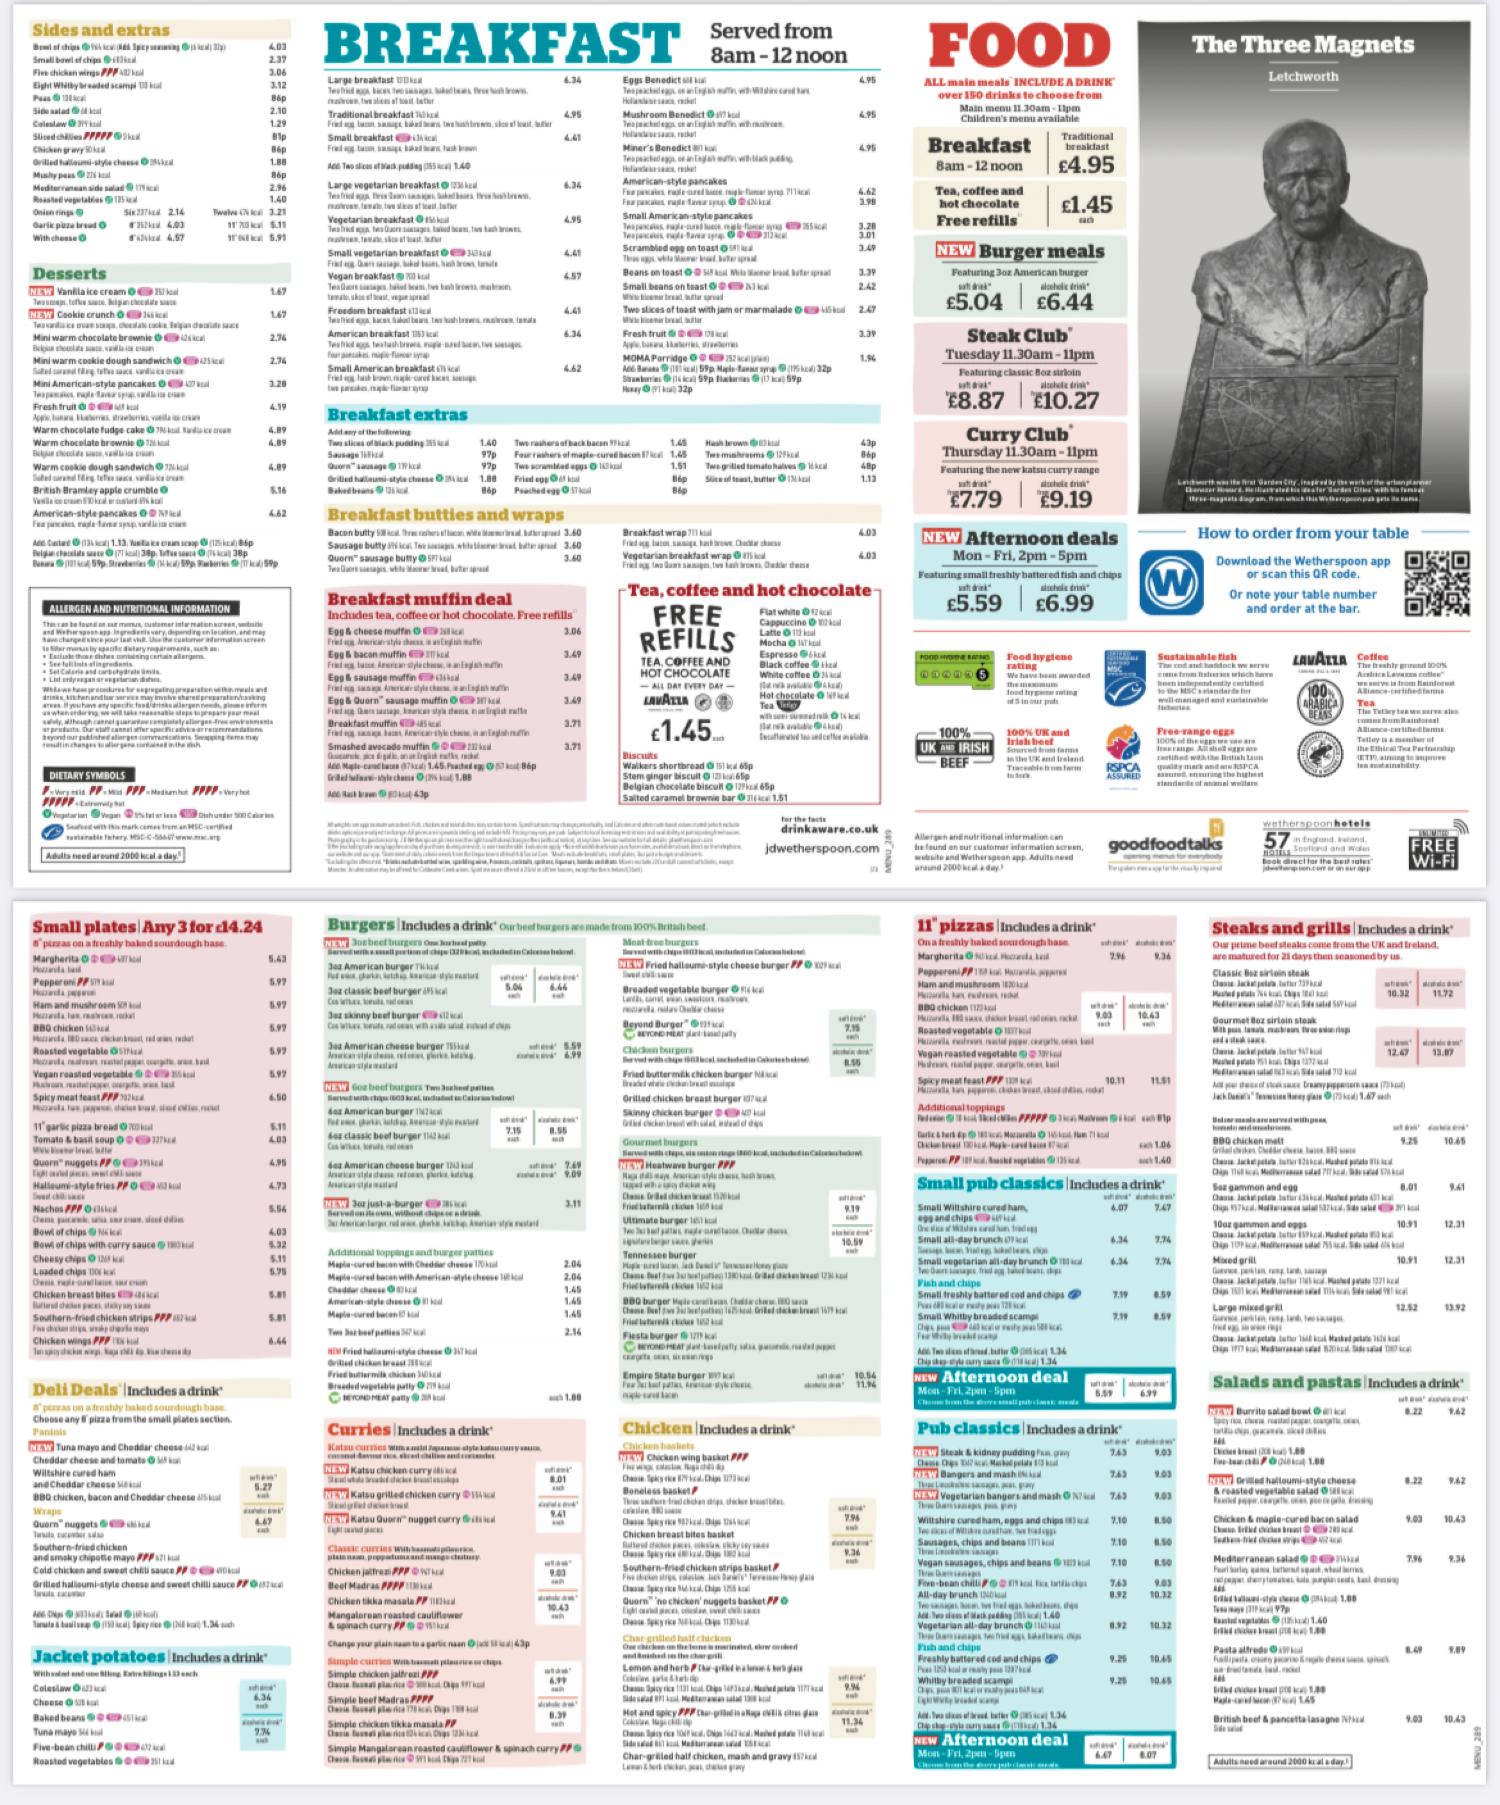 Takeaway Restaurant Menu Page - Wetherspoons – The three magnets - Letchworth Garden City